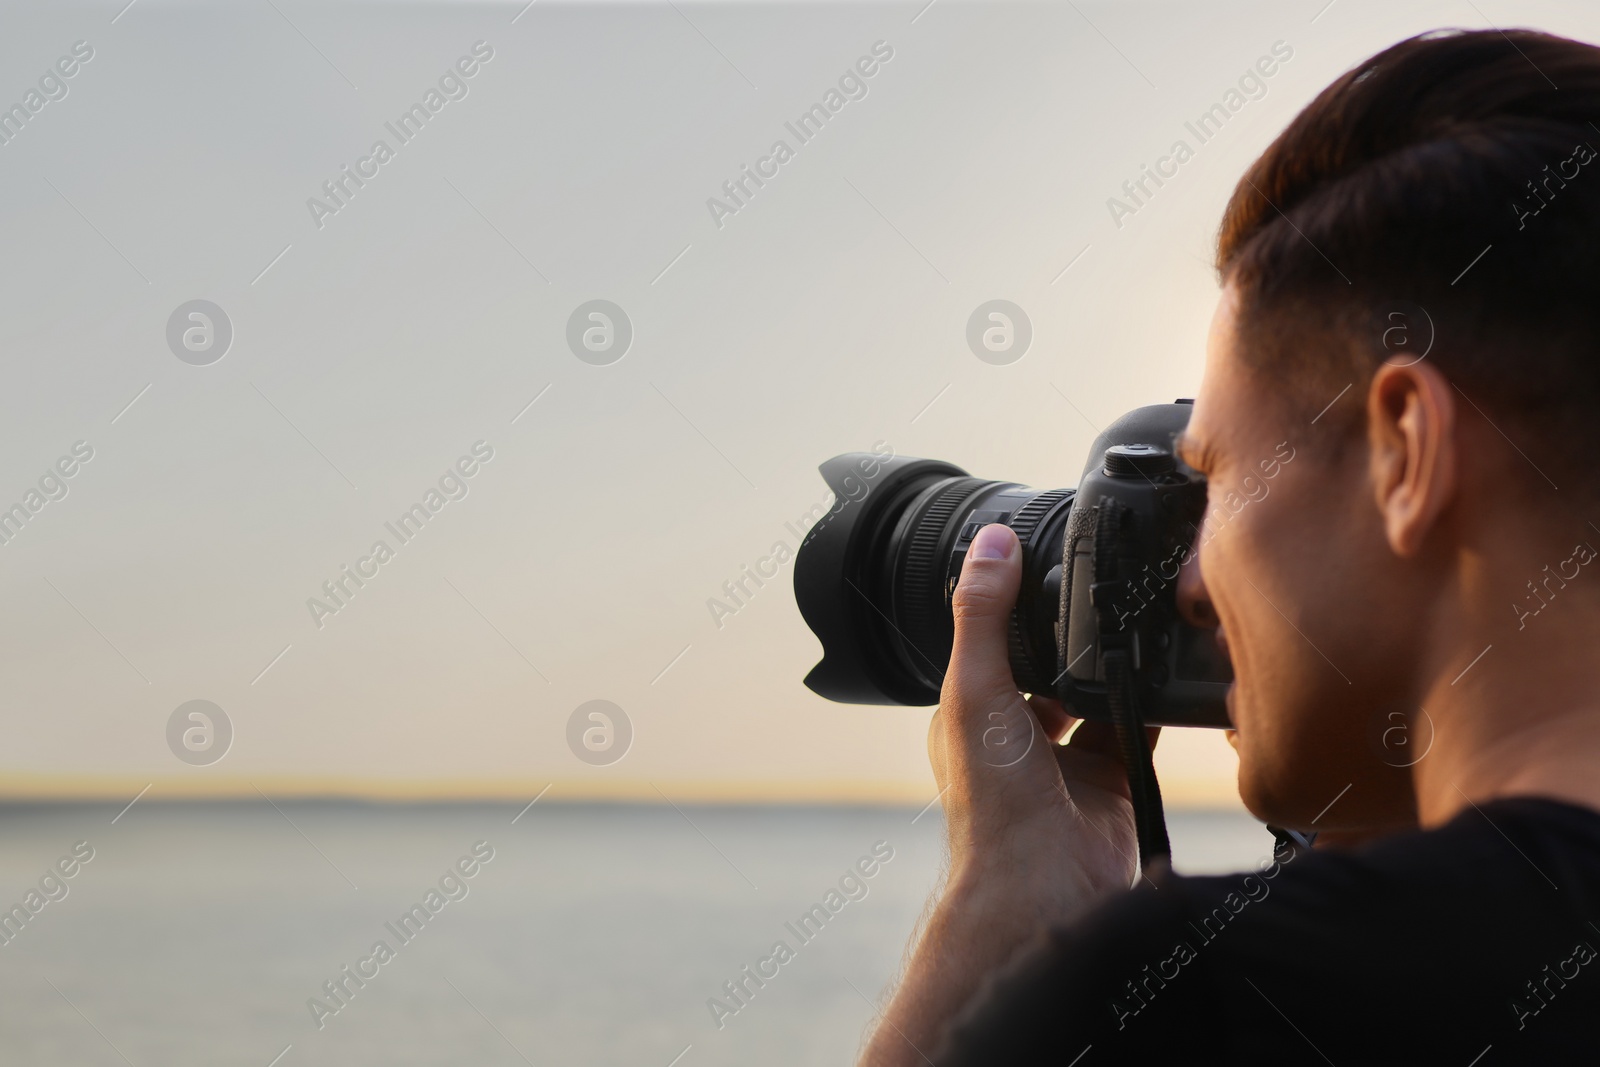 Photo of Photographer taking picture with professional camera near river, closeup